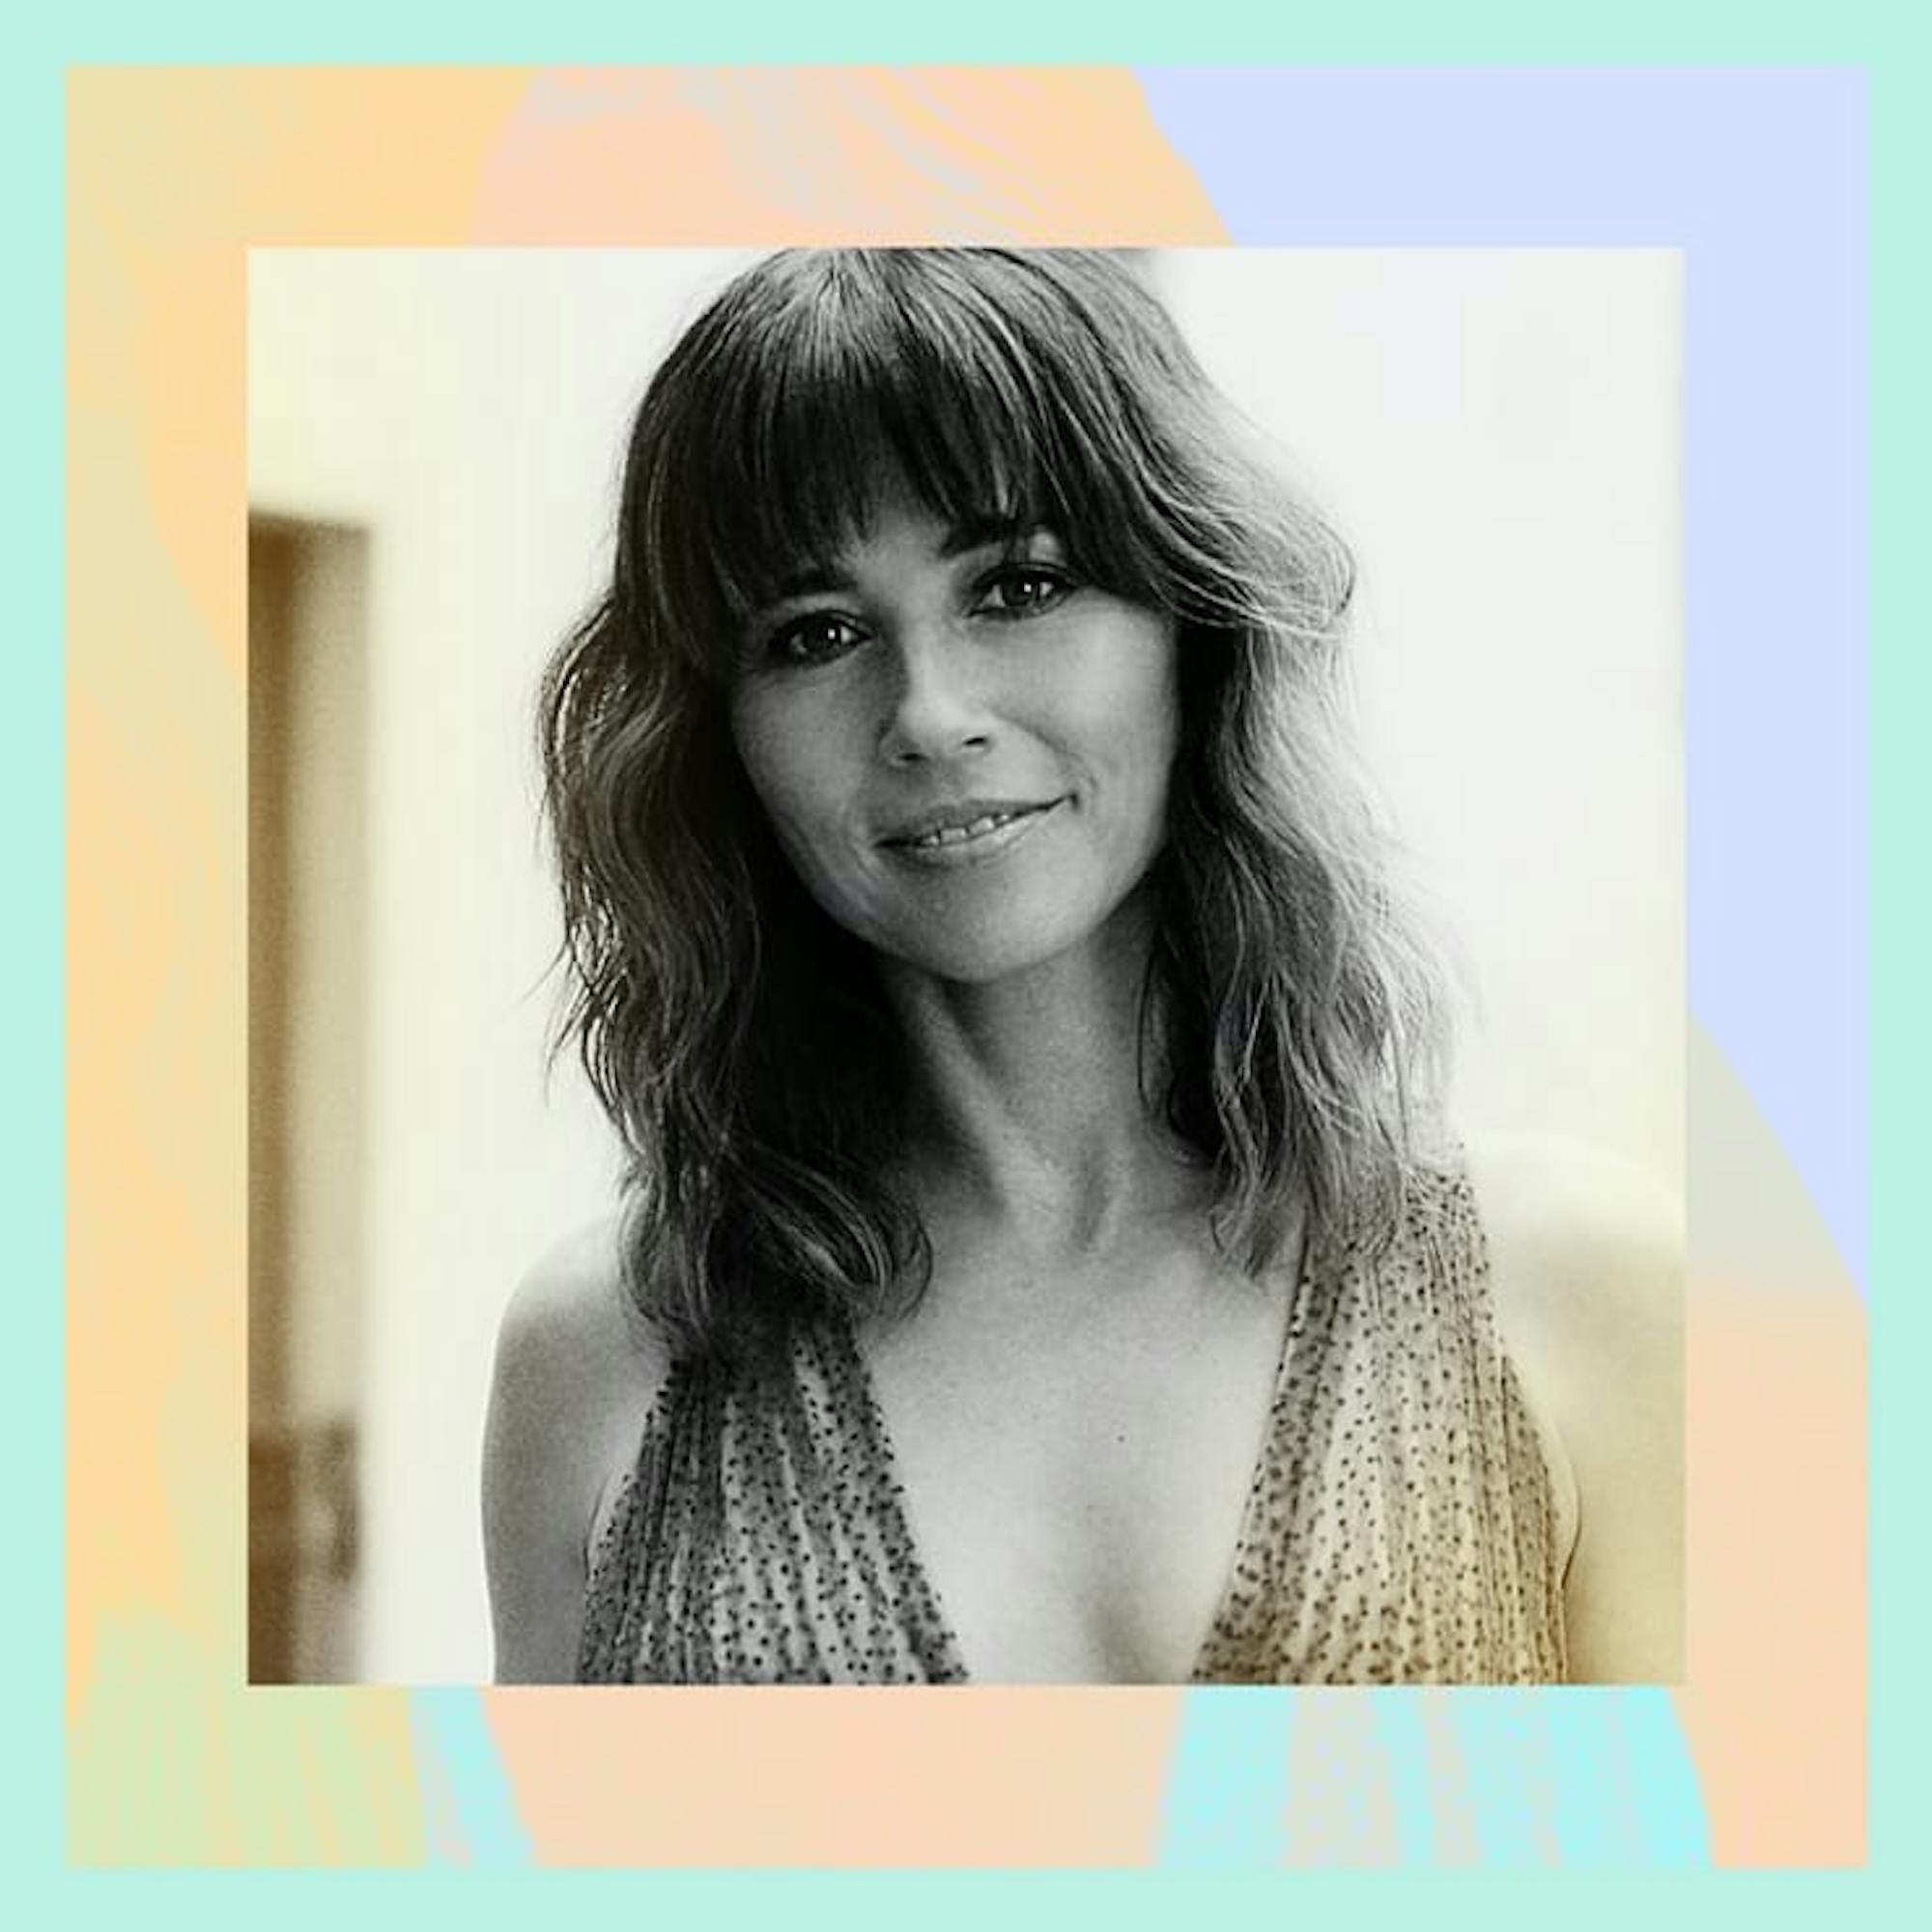 Linda Cardellini: Lead actress in a comedy series, Dead to Me